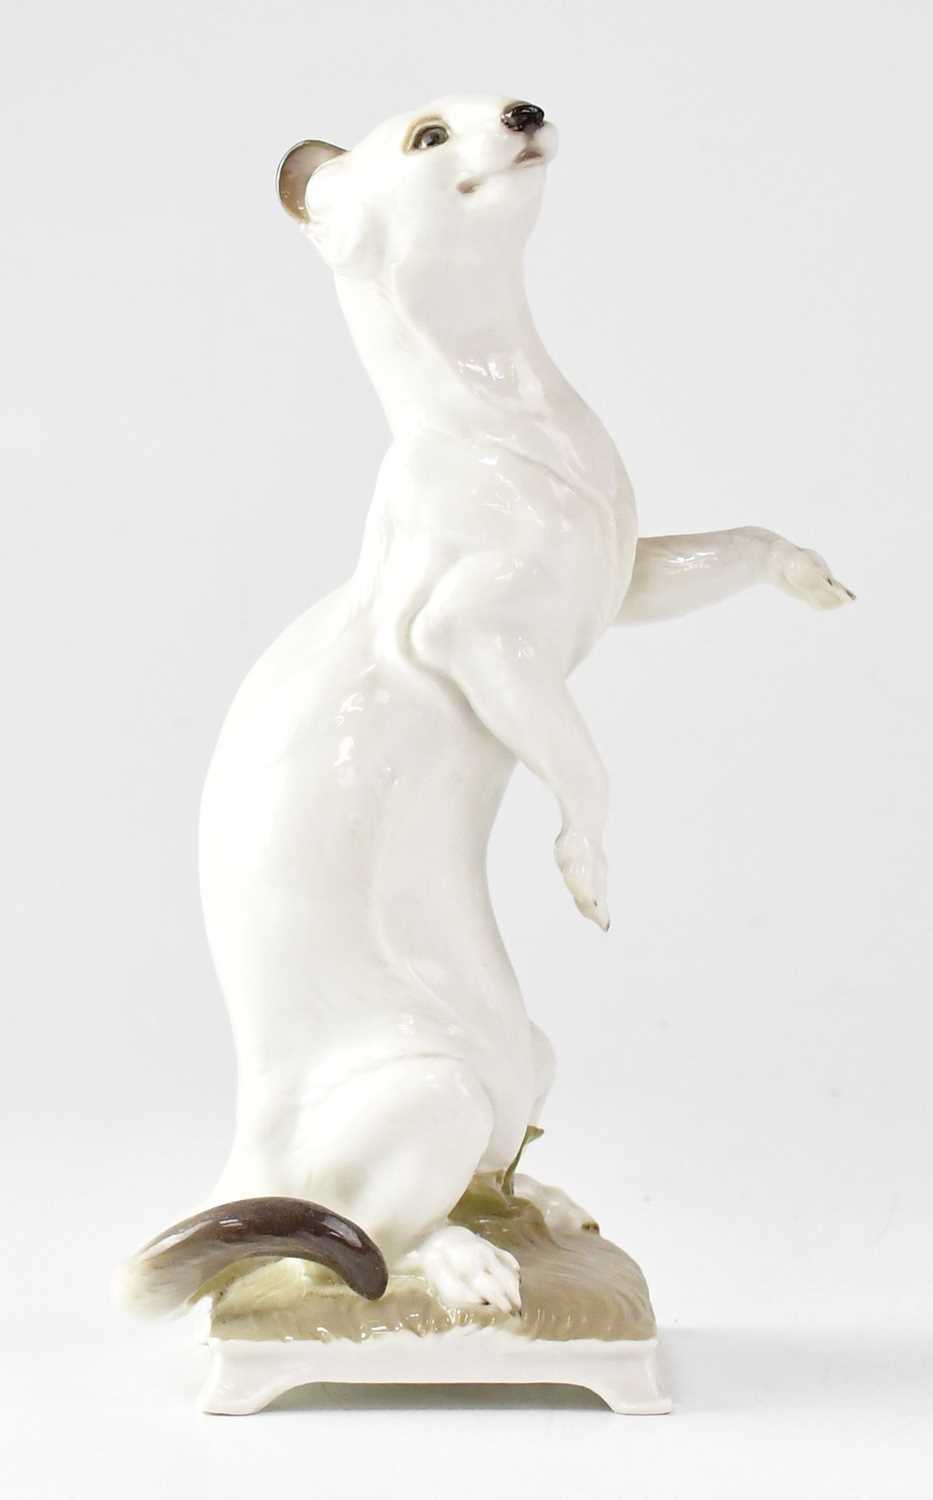 NYMPHENBURG; a 20th century porcelain model of a weasel, by August Gohring, printed mark and